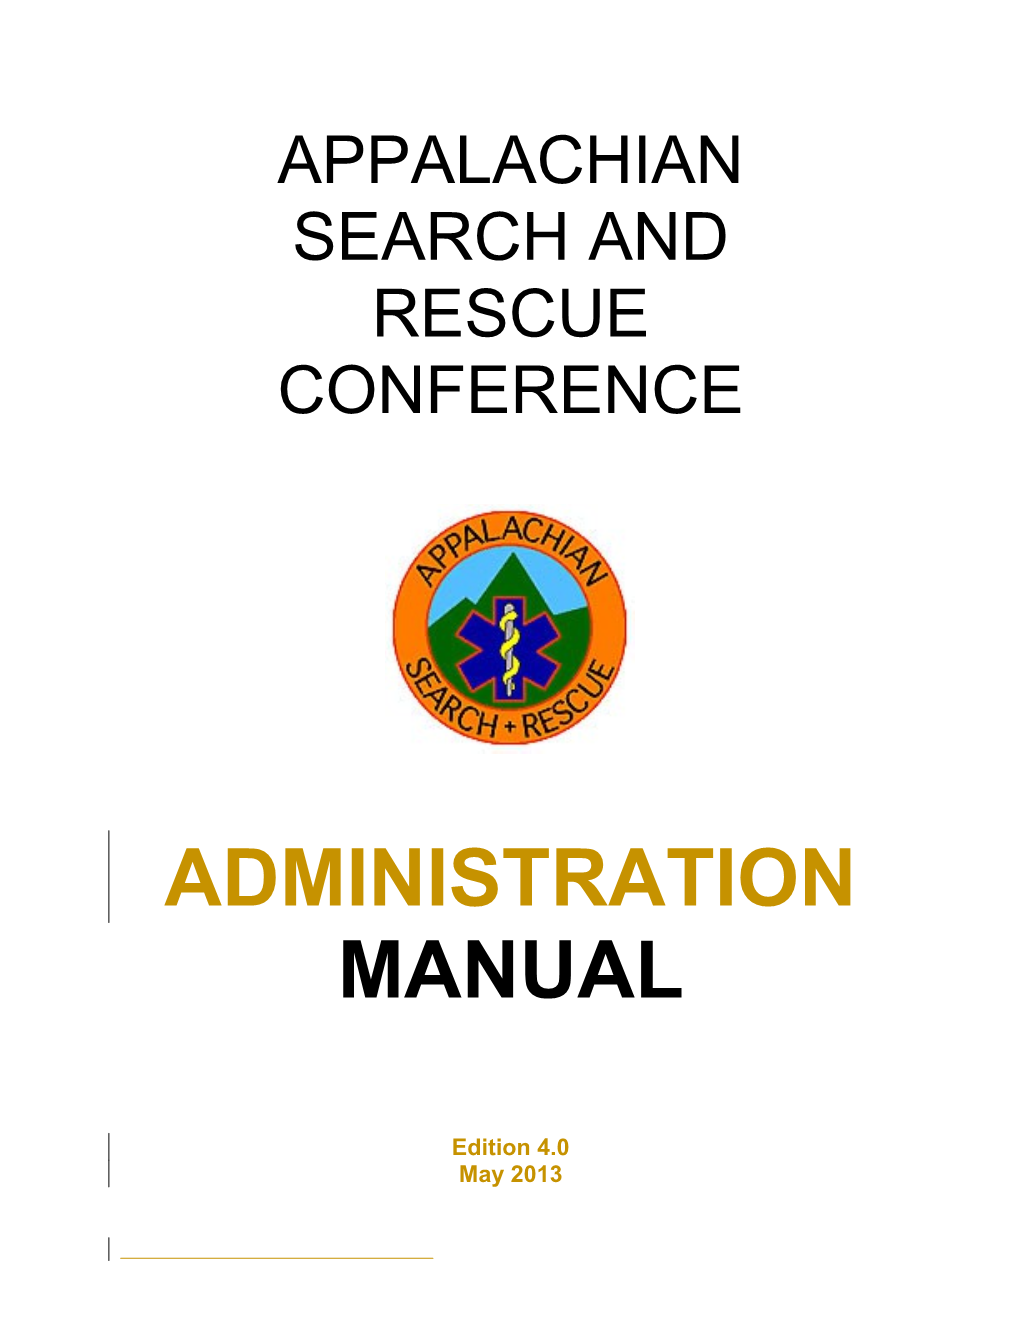 Administration Manual s1